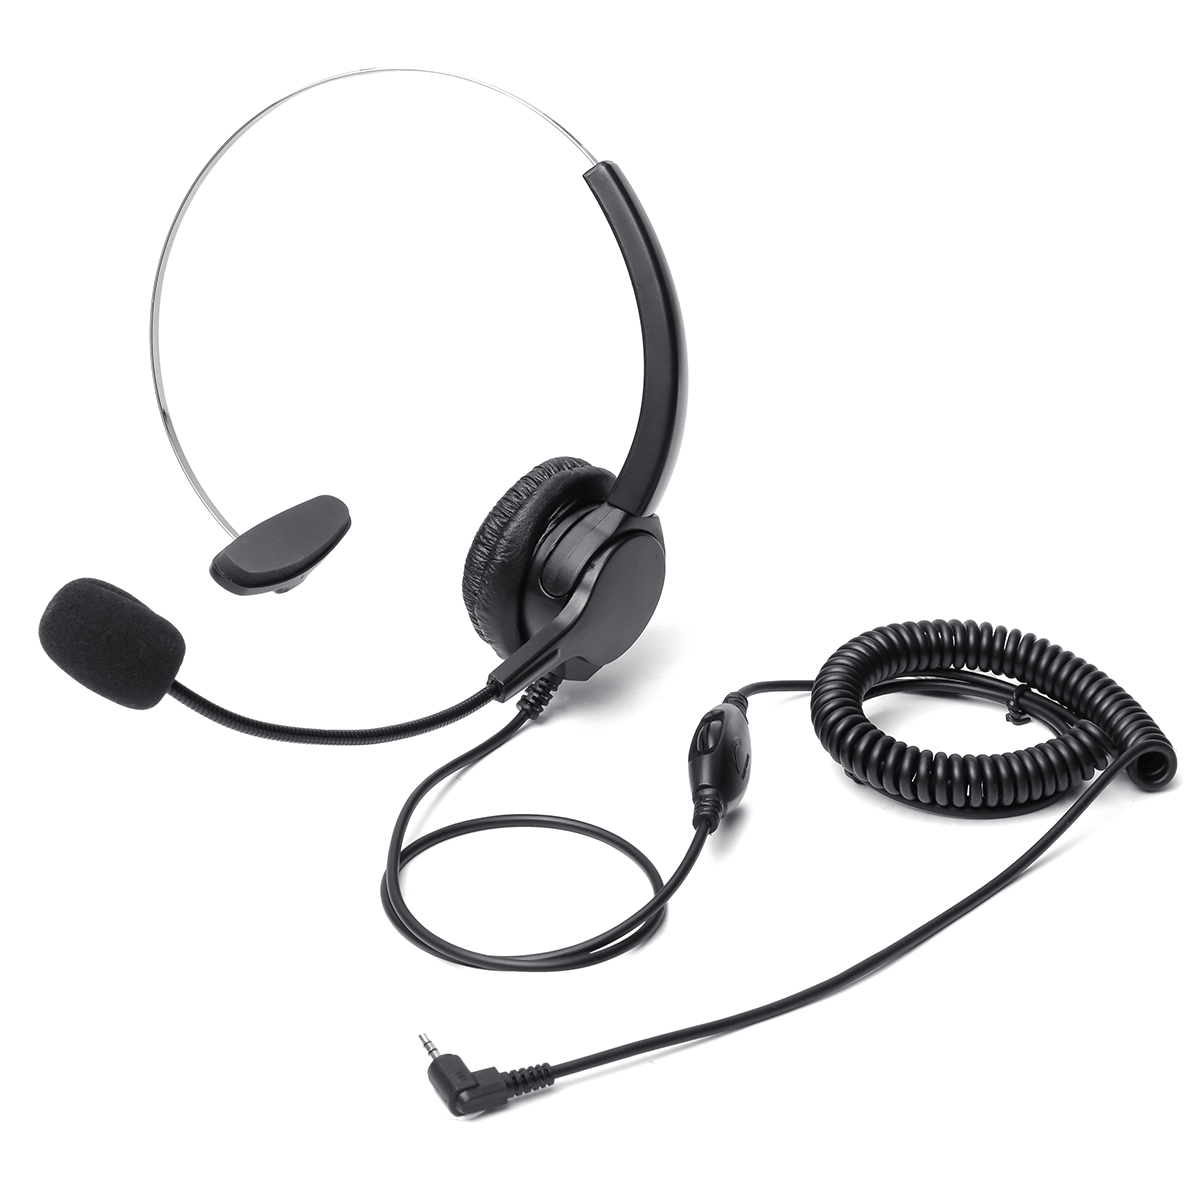 

Monaural Phone Headset Earphone with 2.5mm Plug Hands-Free Noise Cancelling Telephone Call Center